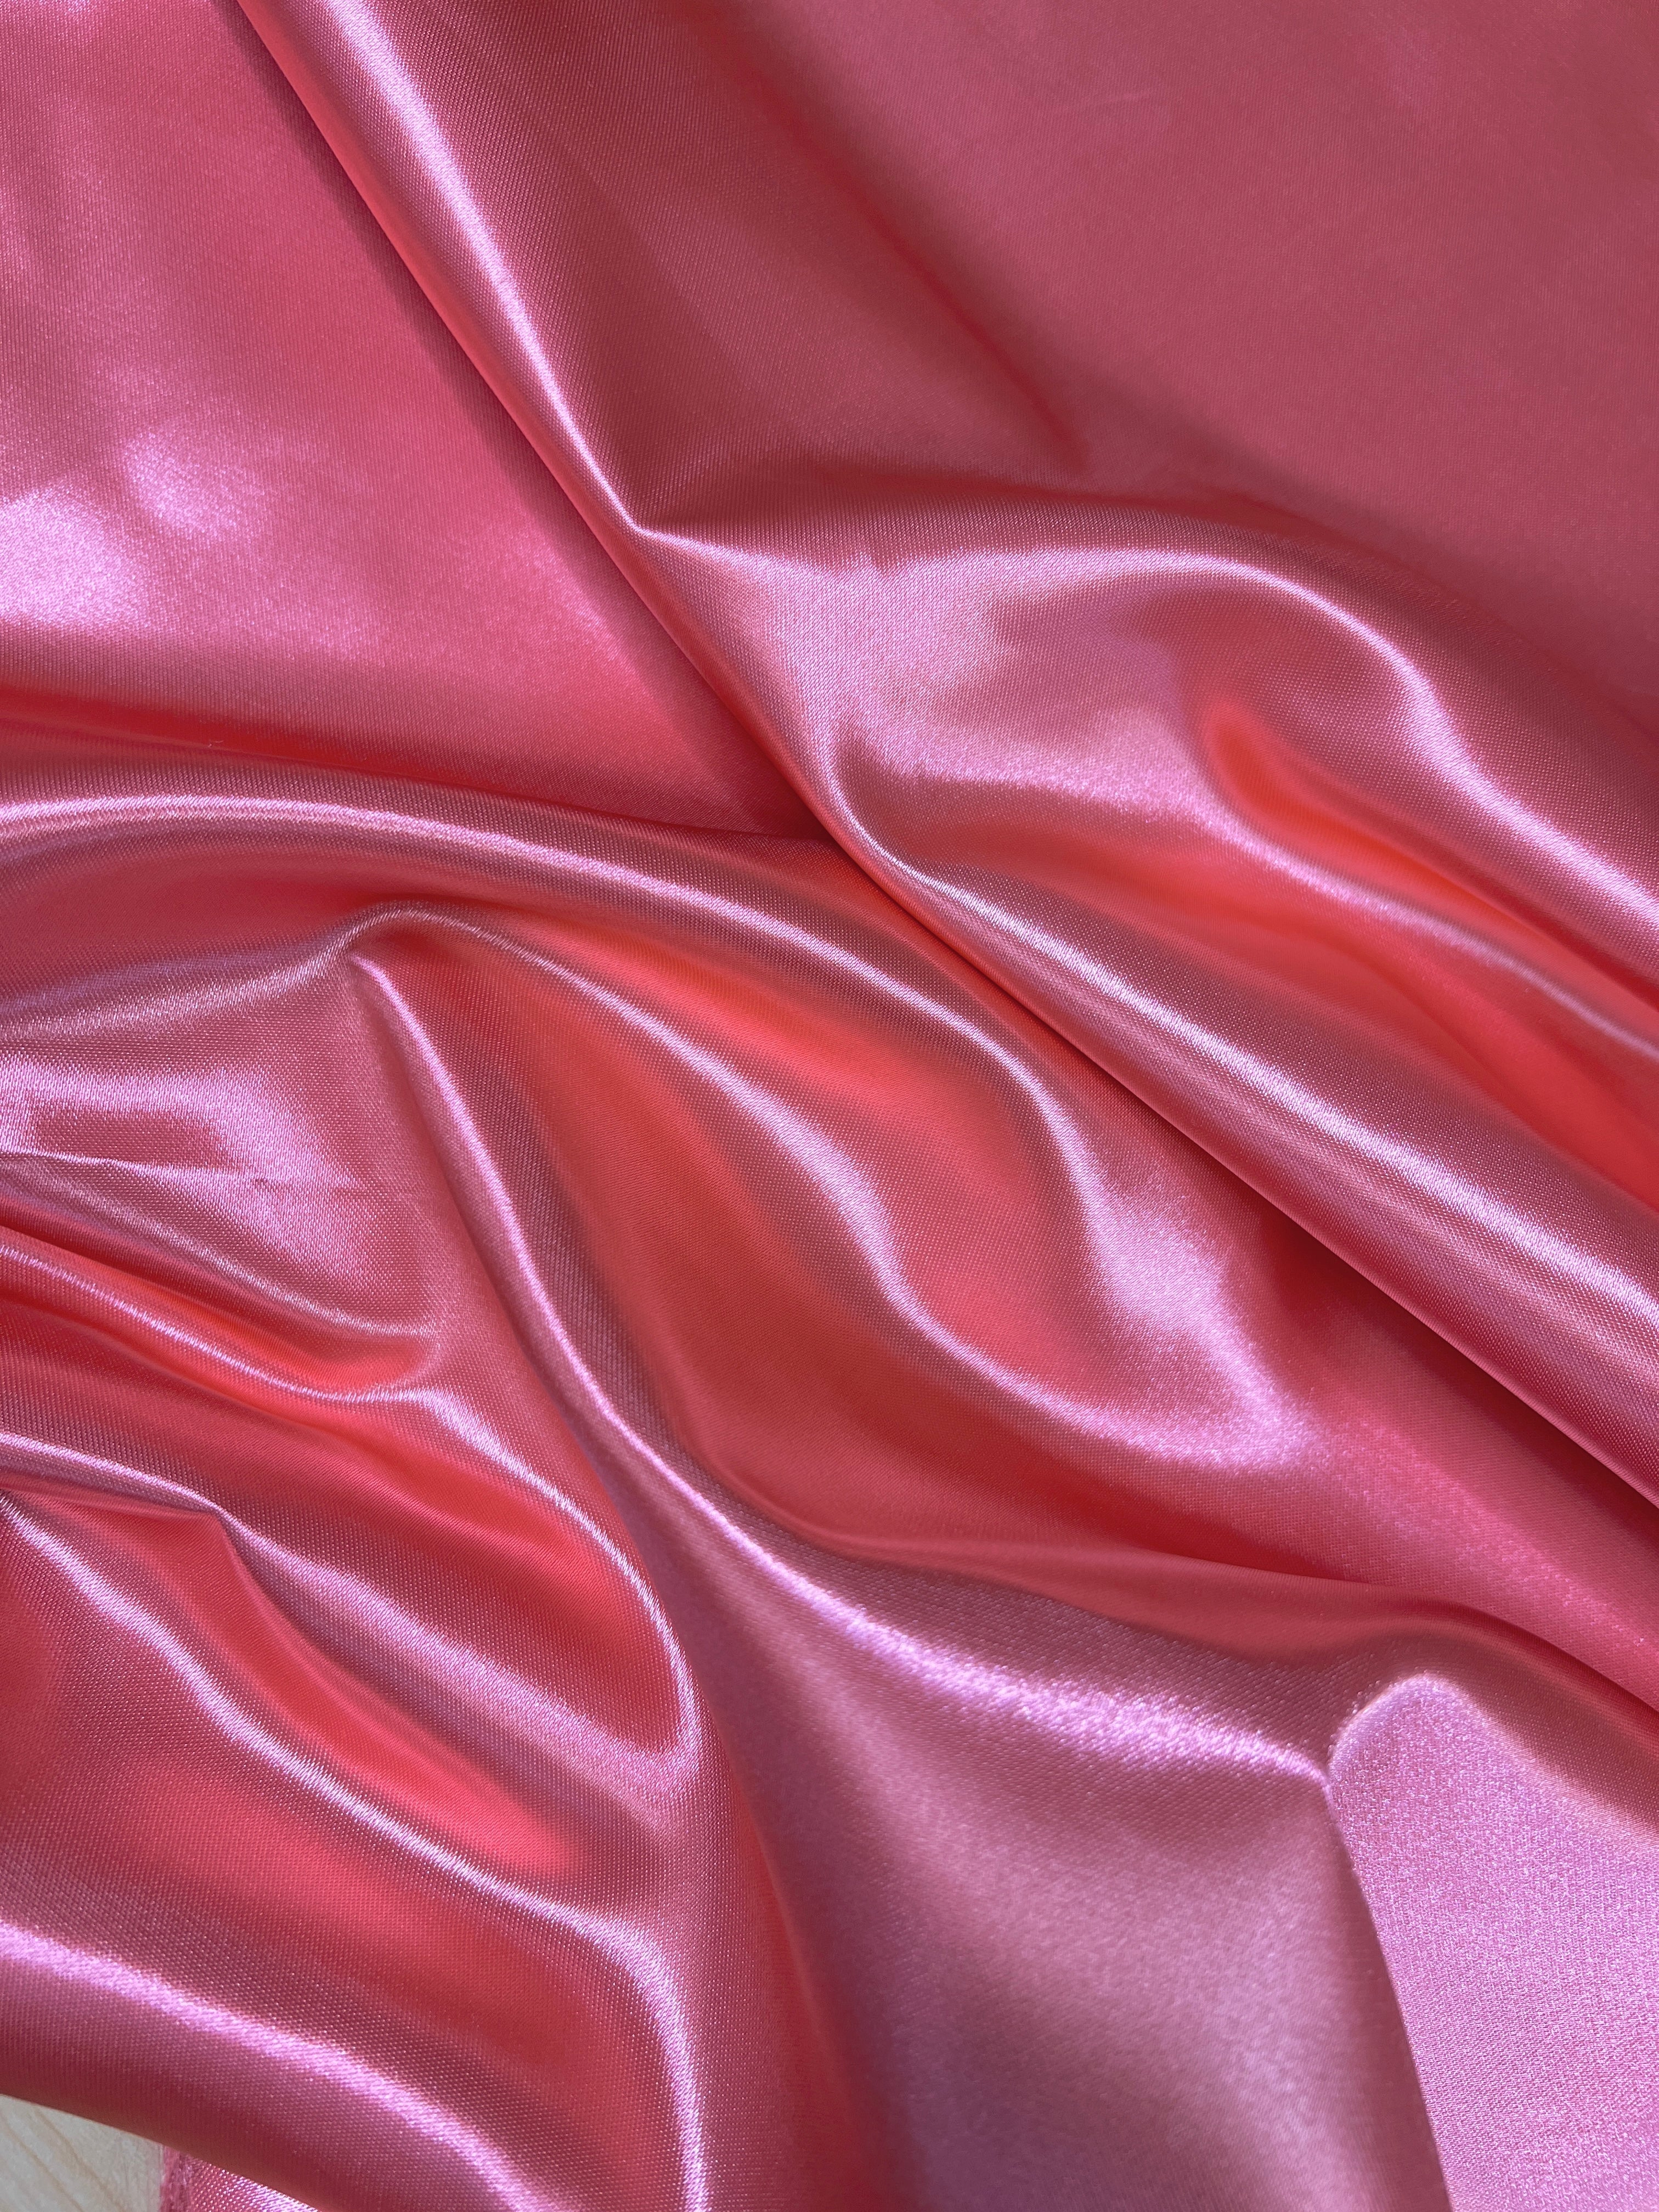 Coral Duchesse Satin Fabric, Coral Bridal Shiny Satin by yard, coral Heavy Satin Fabric for Wedding Dress, satin for woman, coral duchesse color satin, premium quality satin, best satin, cheap satin, satin usa, buy satin online, luxury satin, pink duchesse satin, hot pink color fabric, liliac pink color fabric for dress, light pink color fabric,